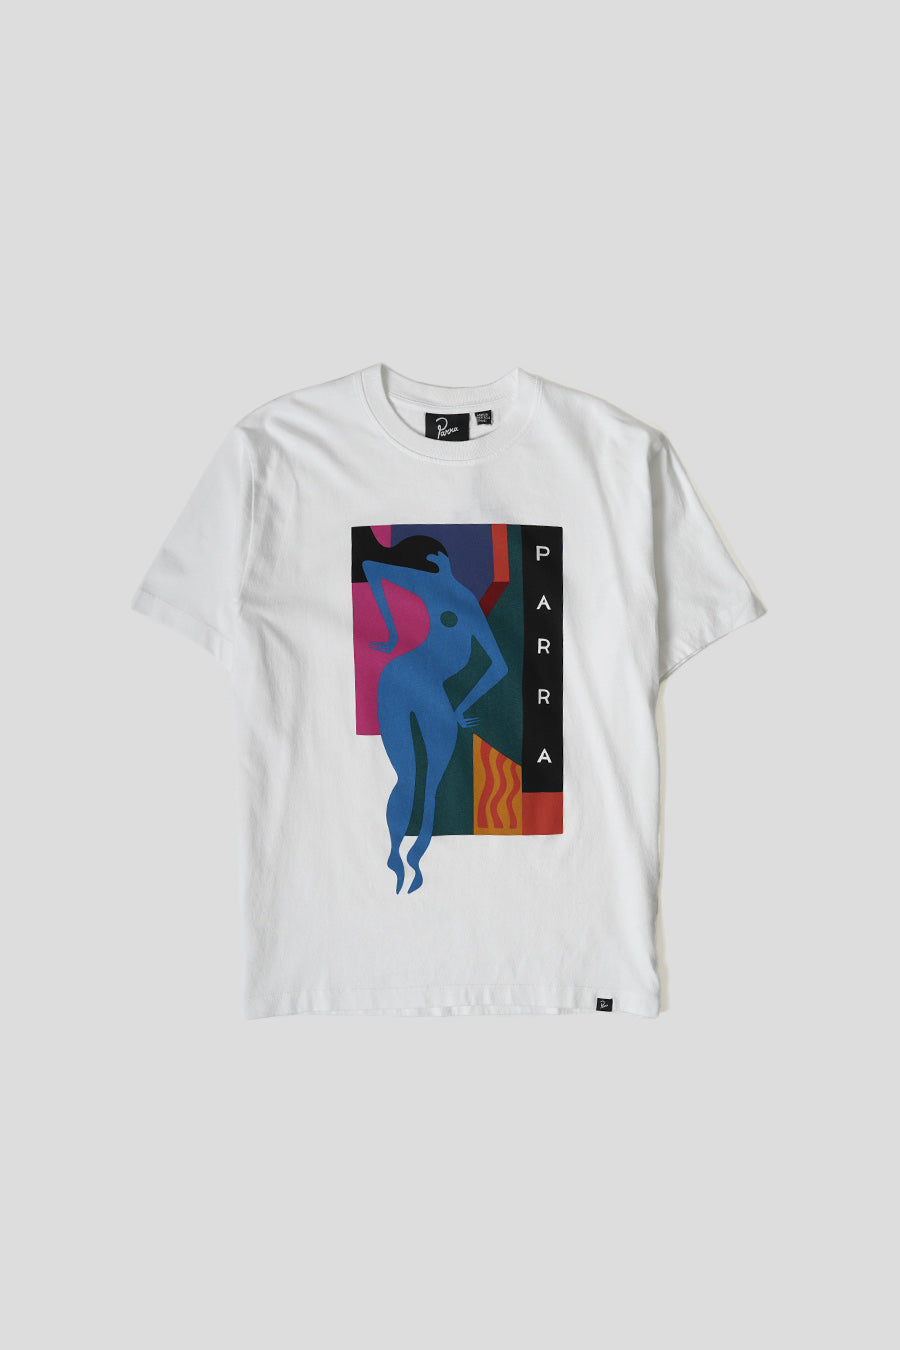 BY PARRA - T-SHIRT BEACHED AND BLANK BLANC - LE LABO STORE